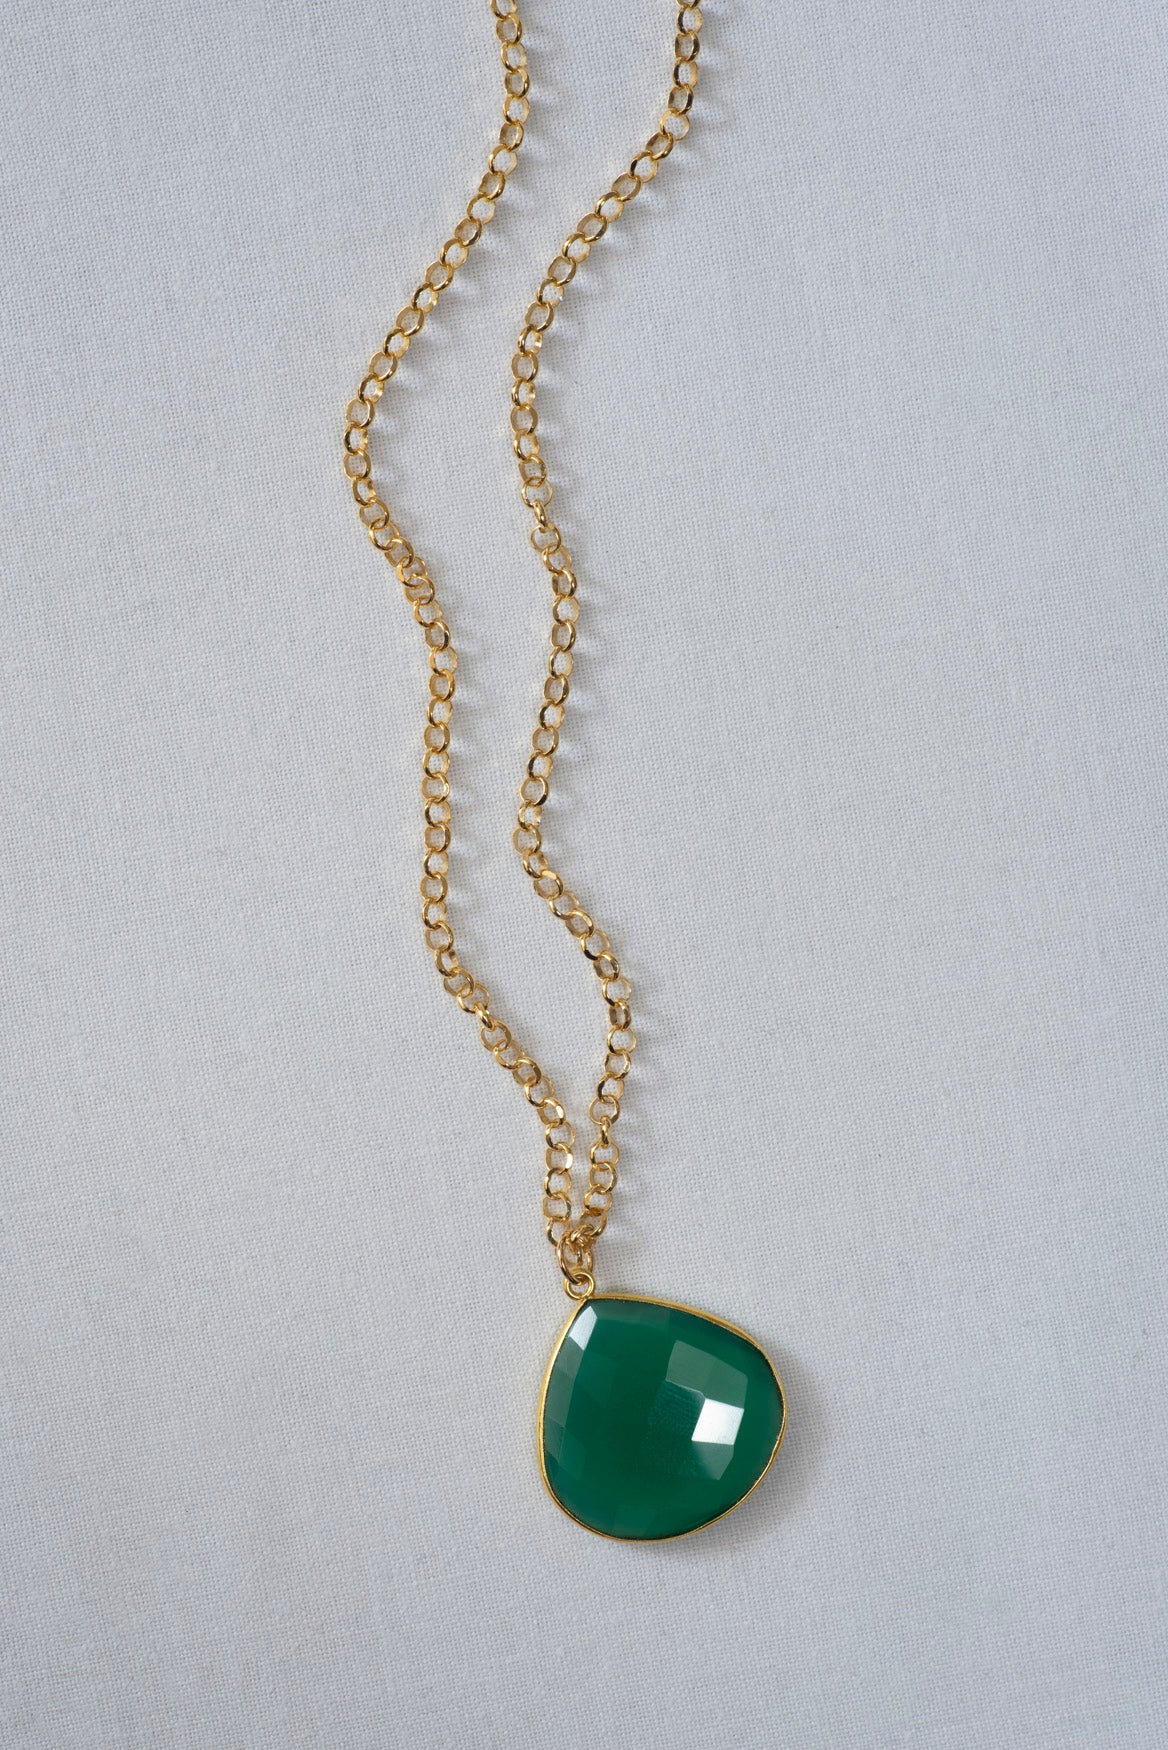 GREEN ONYX HEART || NECKLACE